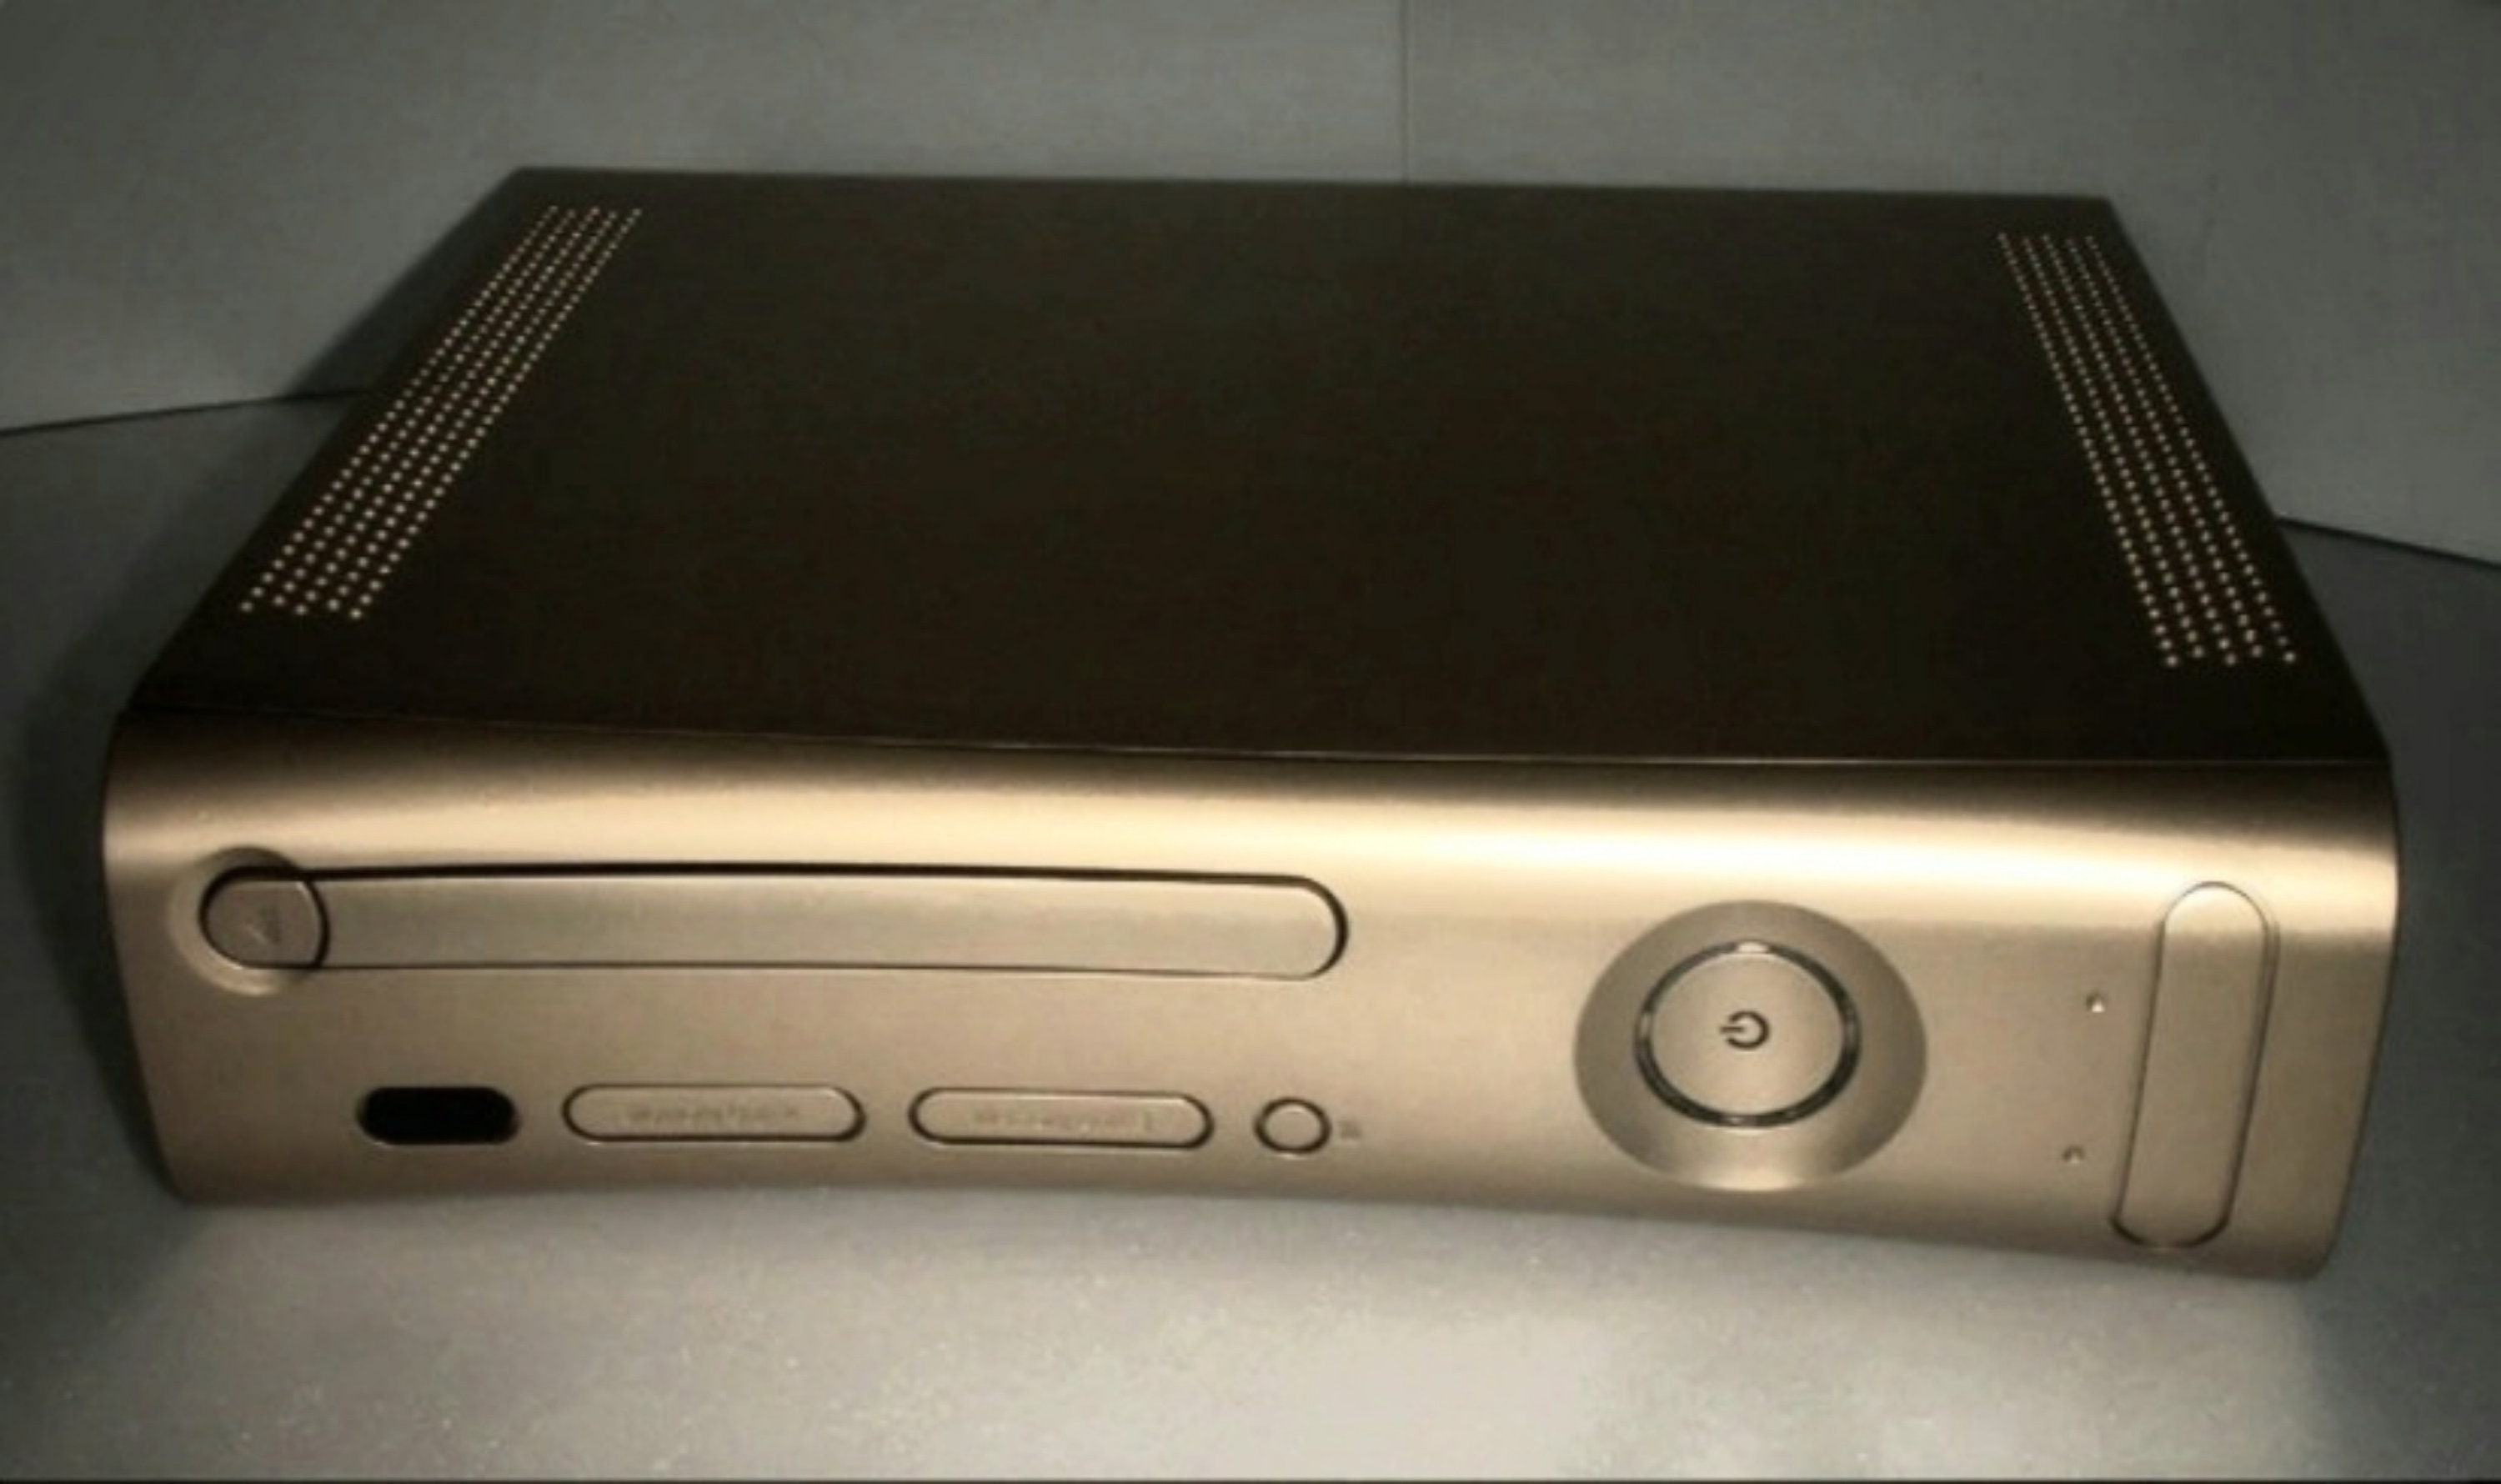 XCM 360 (FAT) Chrome case with HDMI port